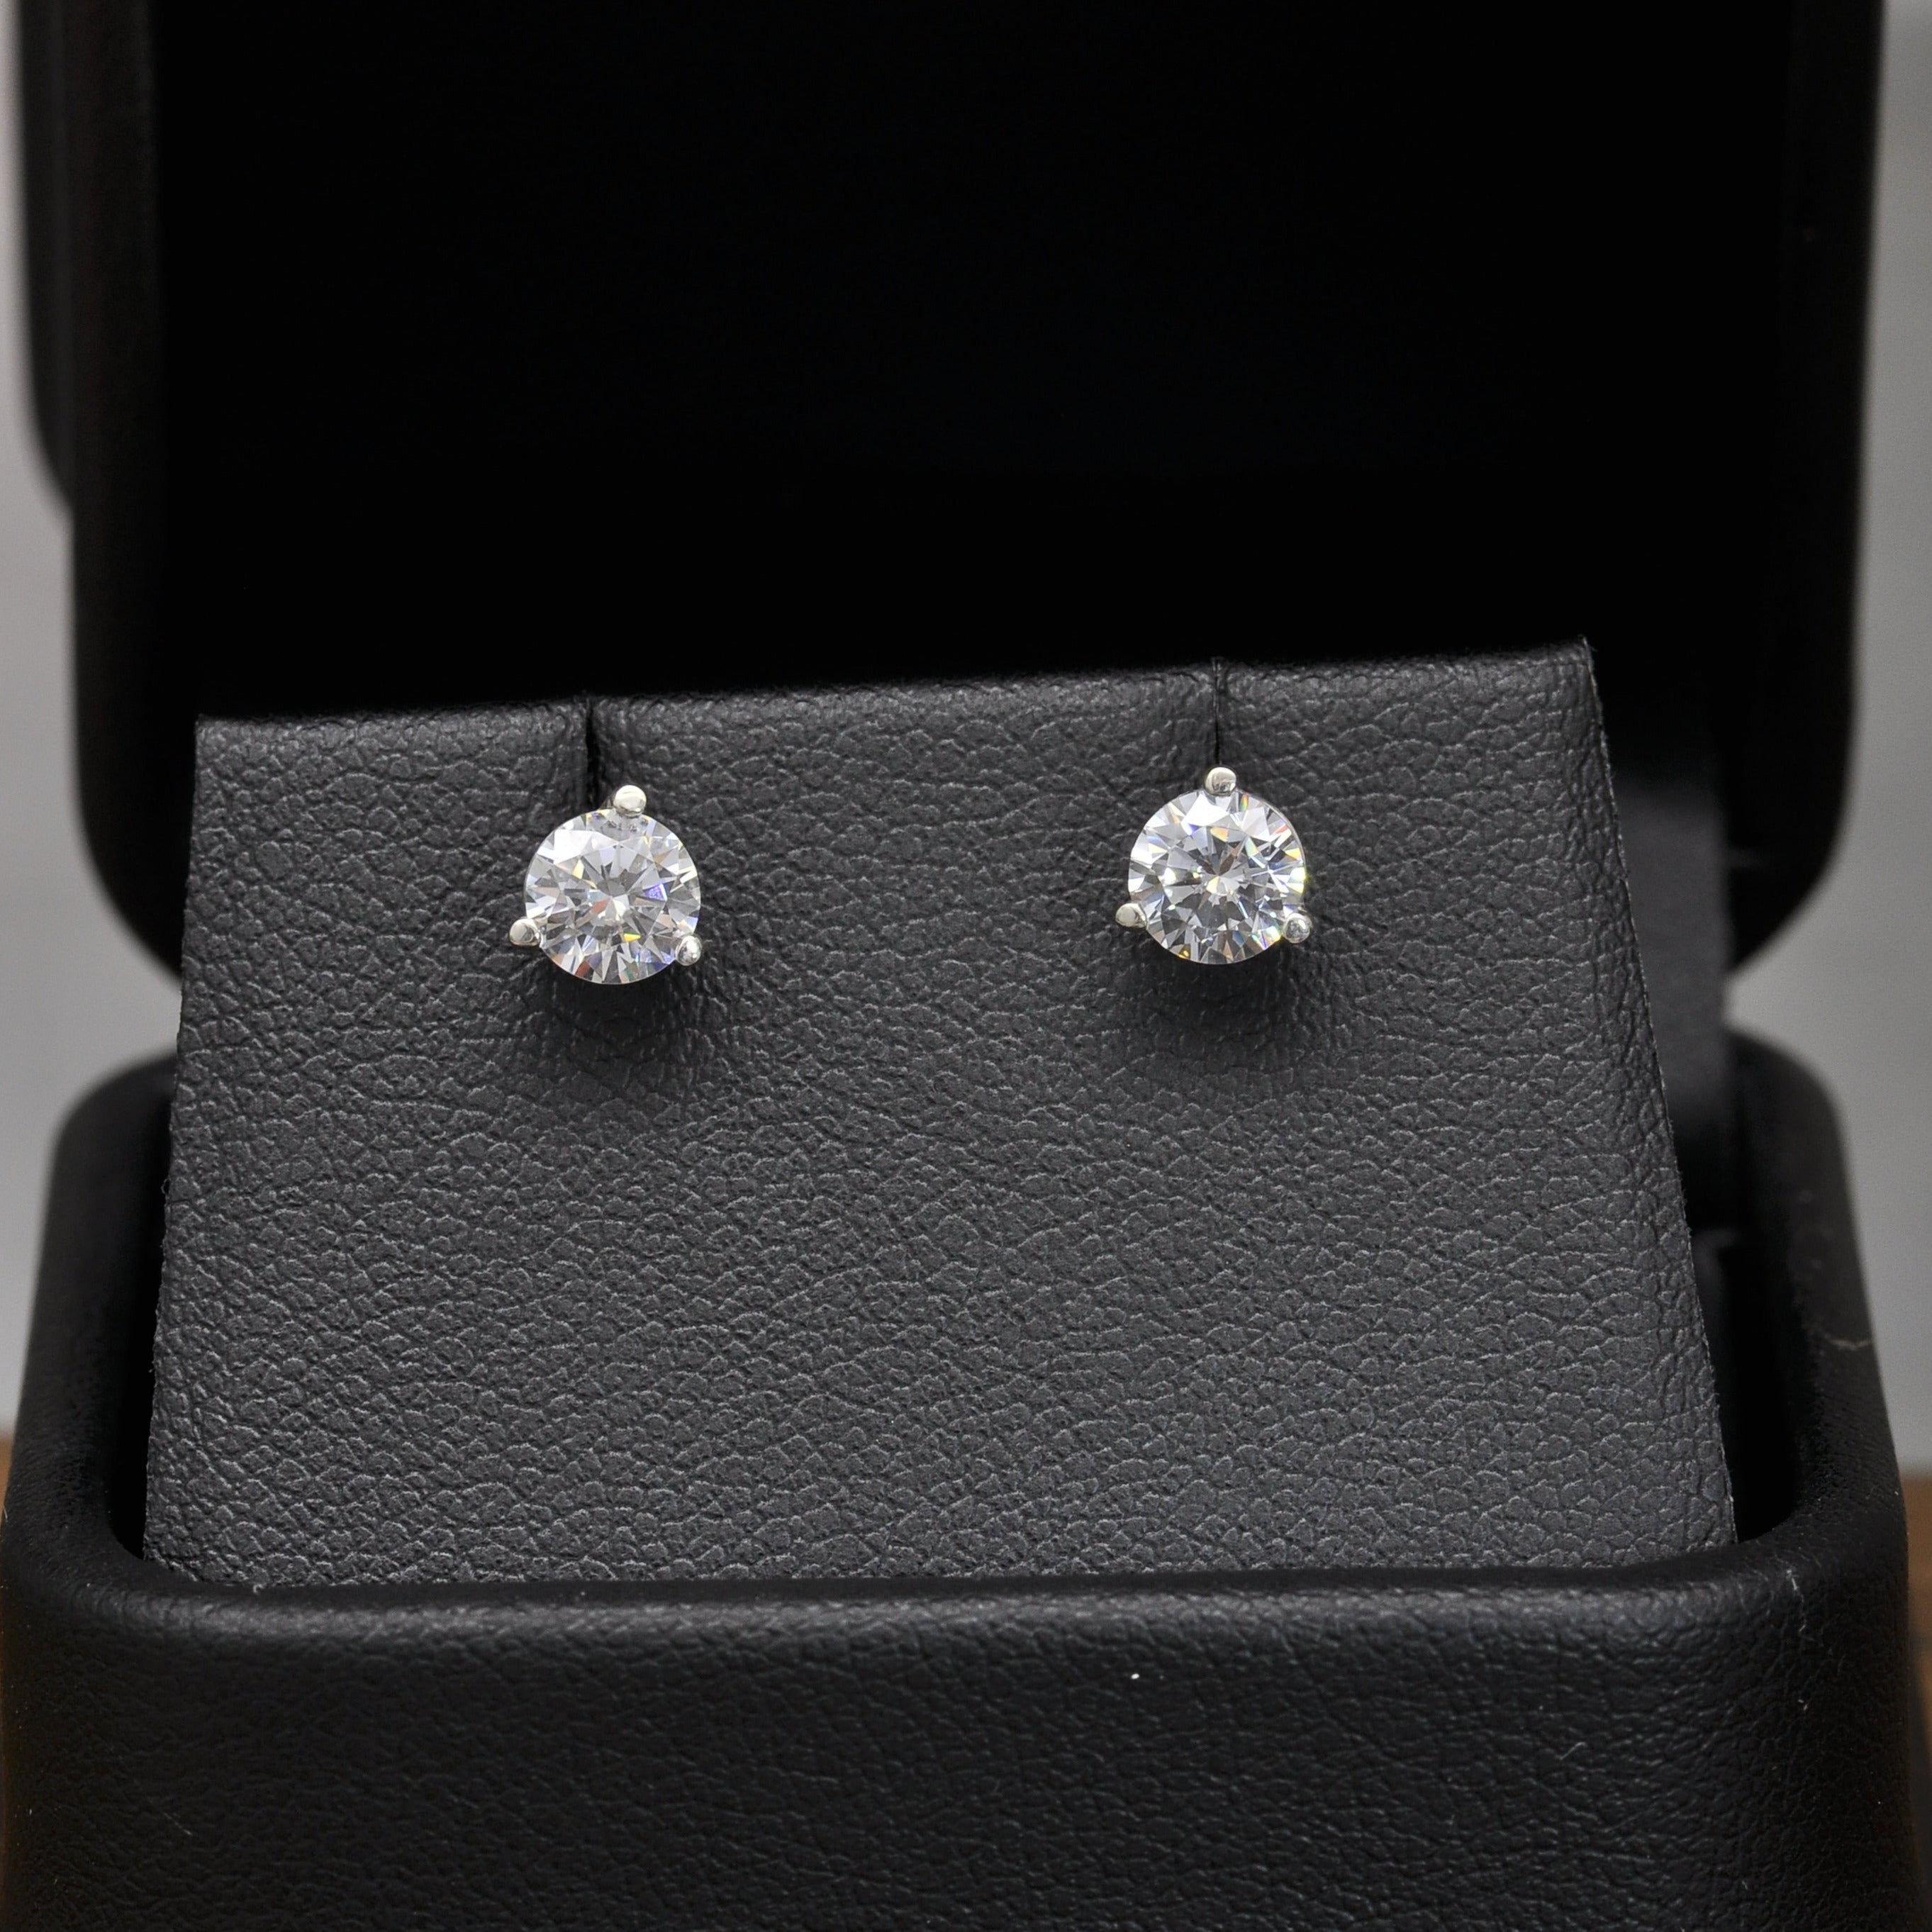 Cubic Zirconia Earrings- *Clearance* 1.0 Carat TGW 3 Prong Round CZ Stud Earring Set in Sterling Silver with Push Back